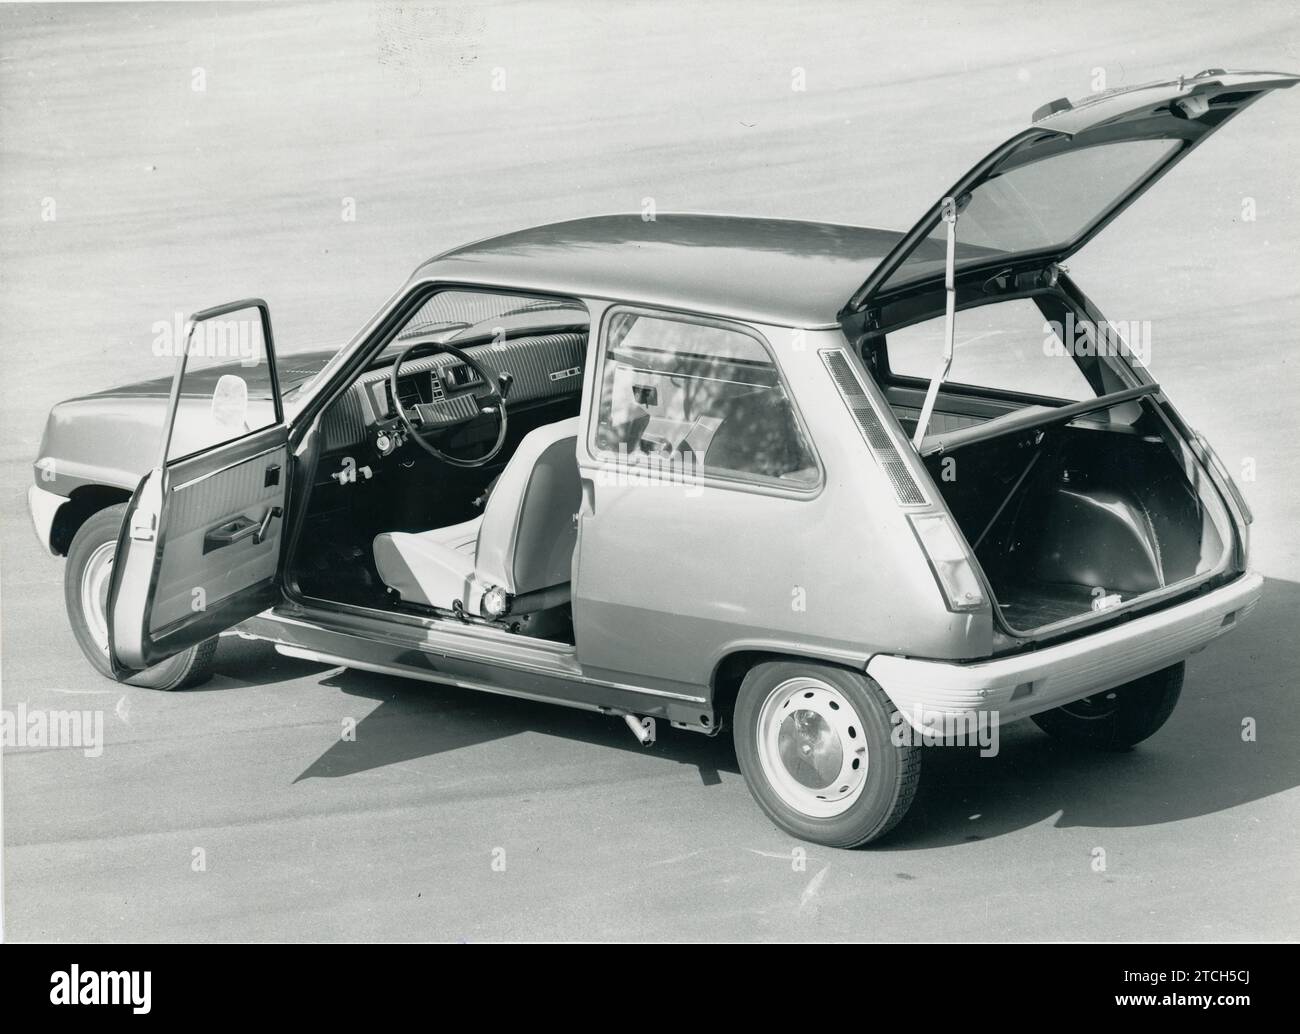 March 1972. The Renault 5, ABC award for Best Car of the Year 1972. In the image, the three doors open in the type called 'break'. Credit: Album / Archivo ABC Stock Photo